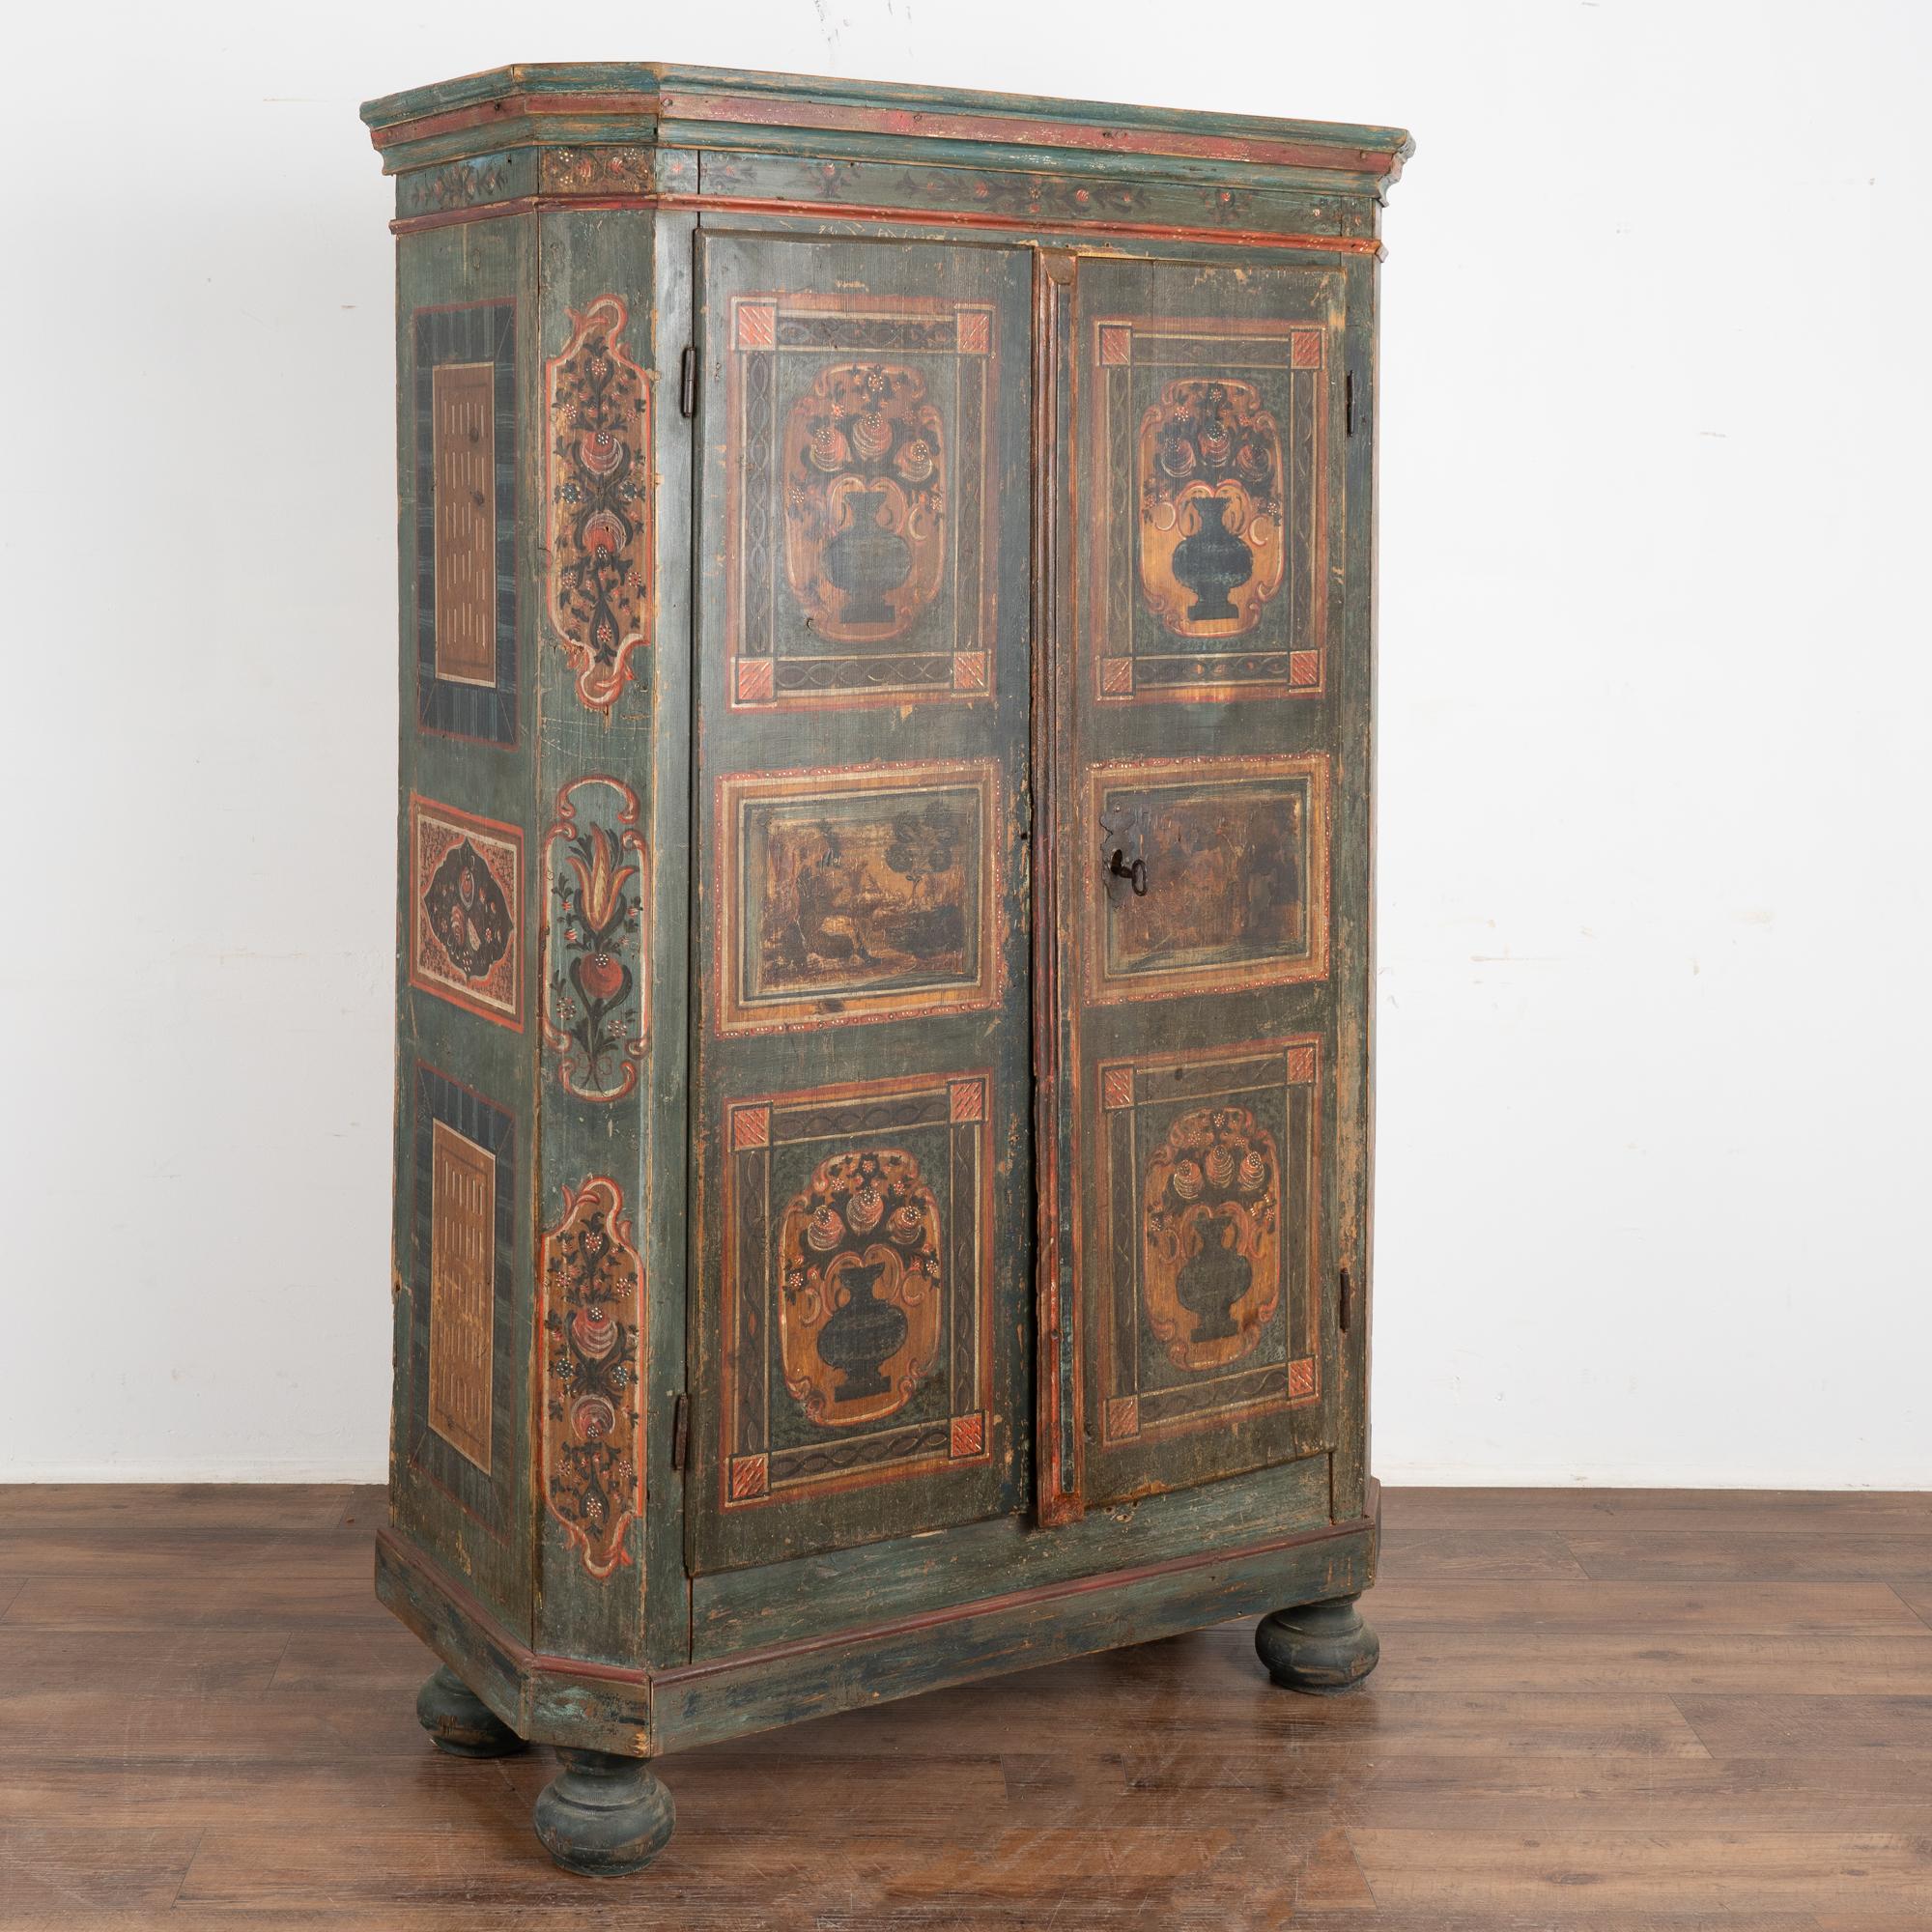 This painted armoire still maintains the quality and details of the original hand-painted finish with background tones of green, teal and blue.
Notice how the 4 panels of flowers in vases on the front doors are accented by additional flowers along